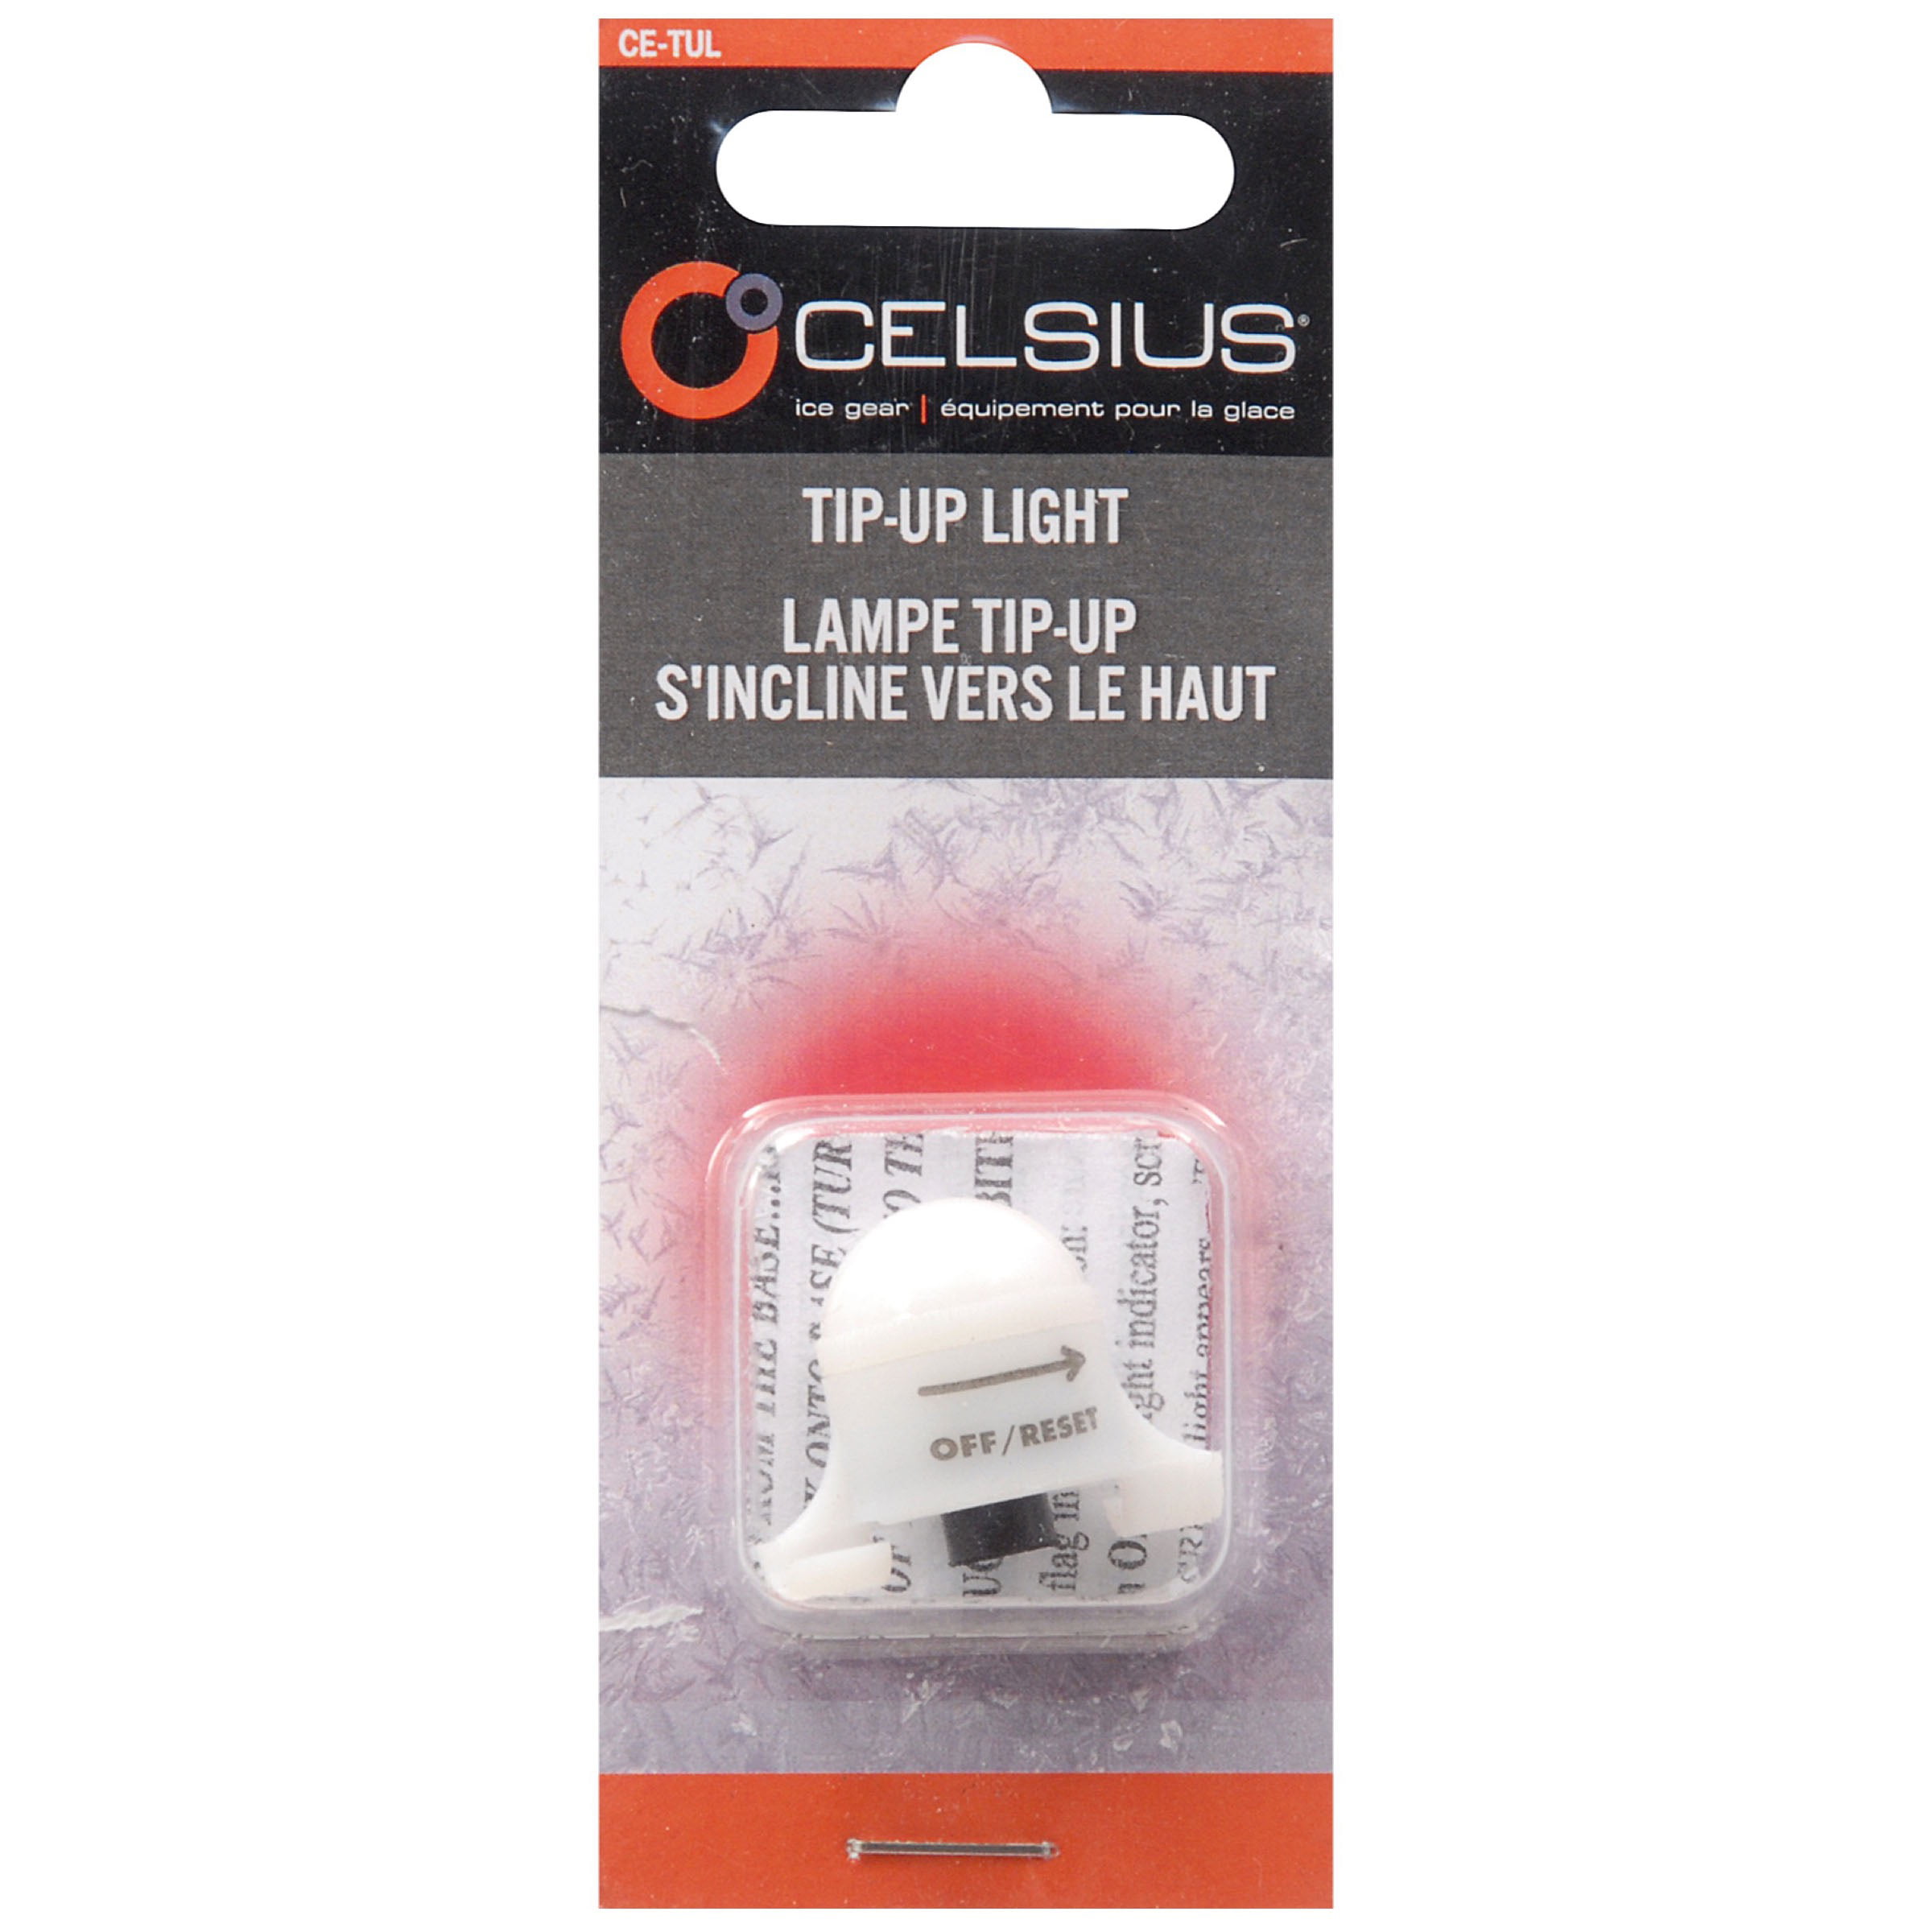 Celsius Tip-up Light Ice Fishing Sports & Outdoor Equipment - Qty 1